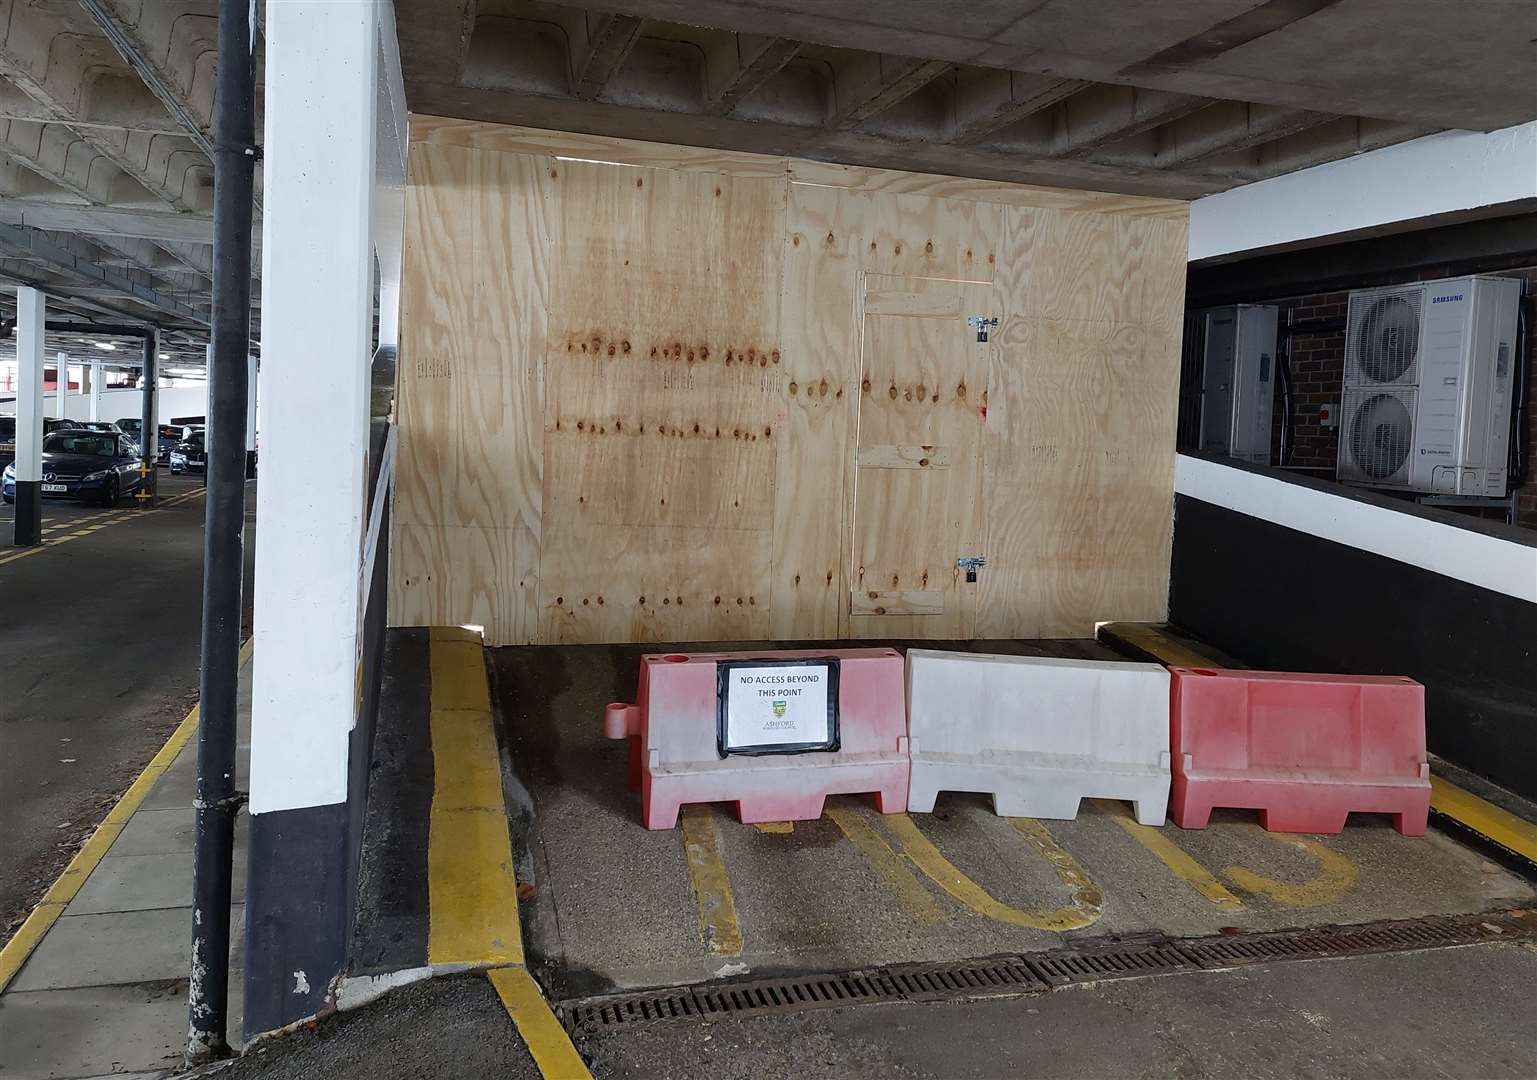 The top floor of the car park was shut earlier this year